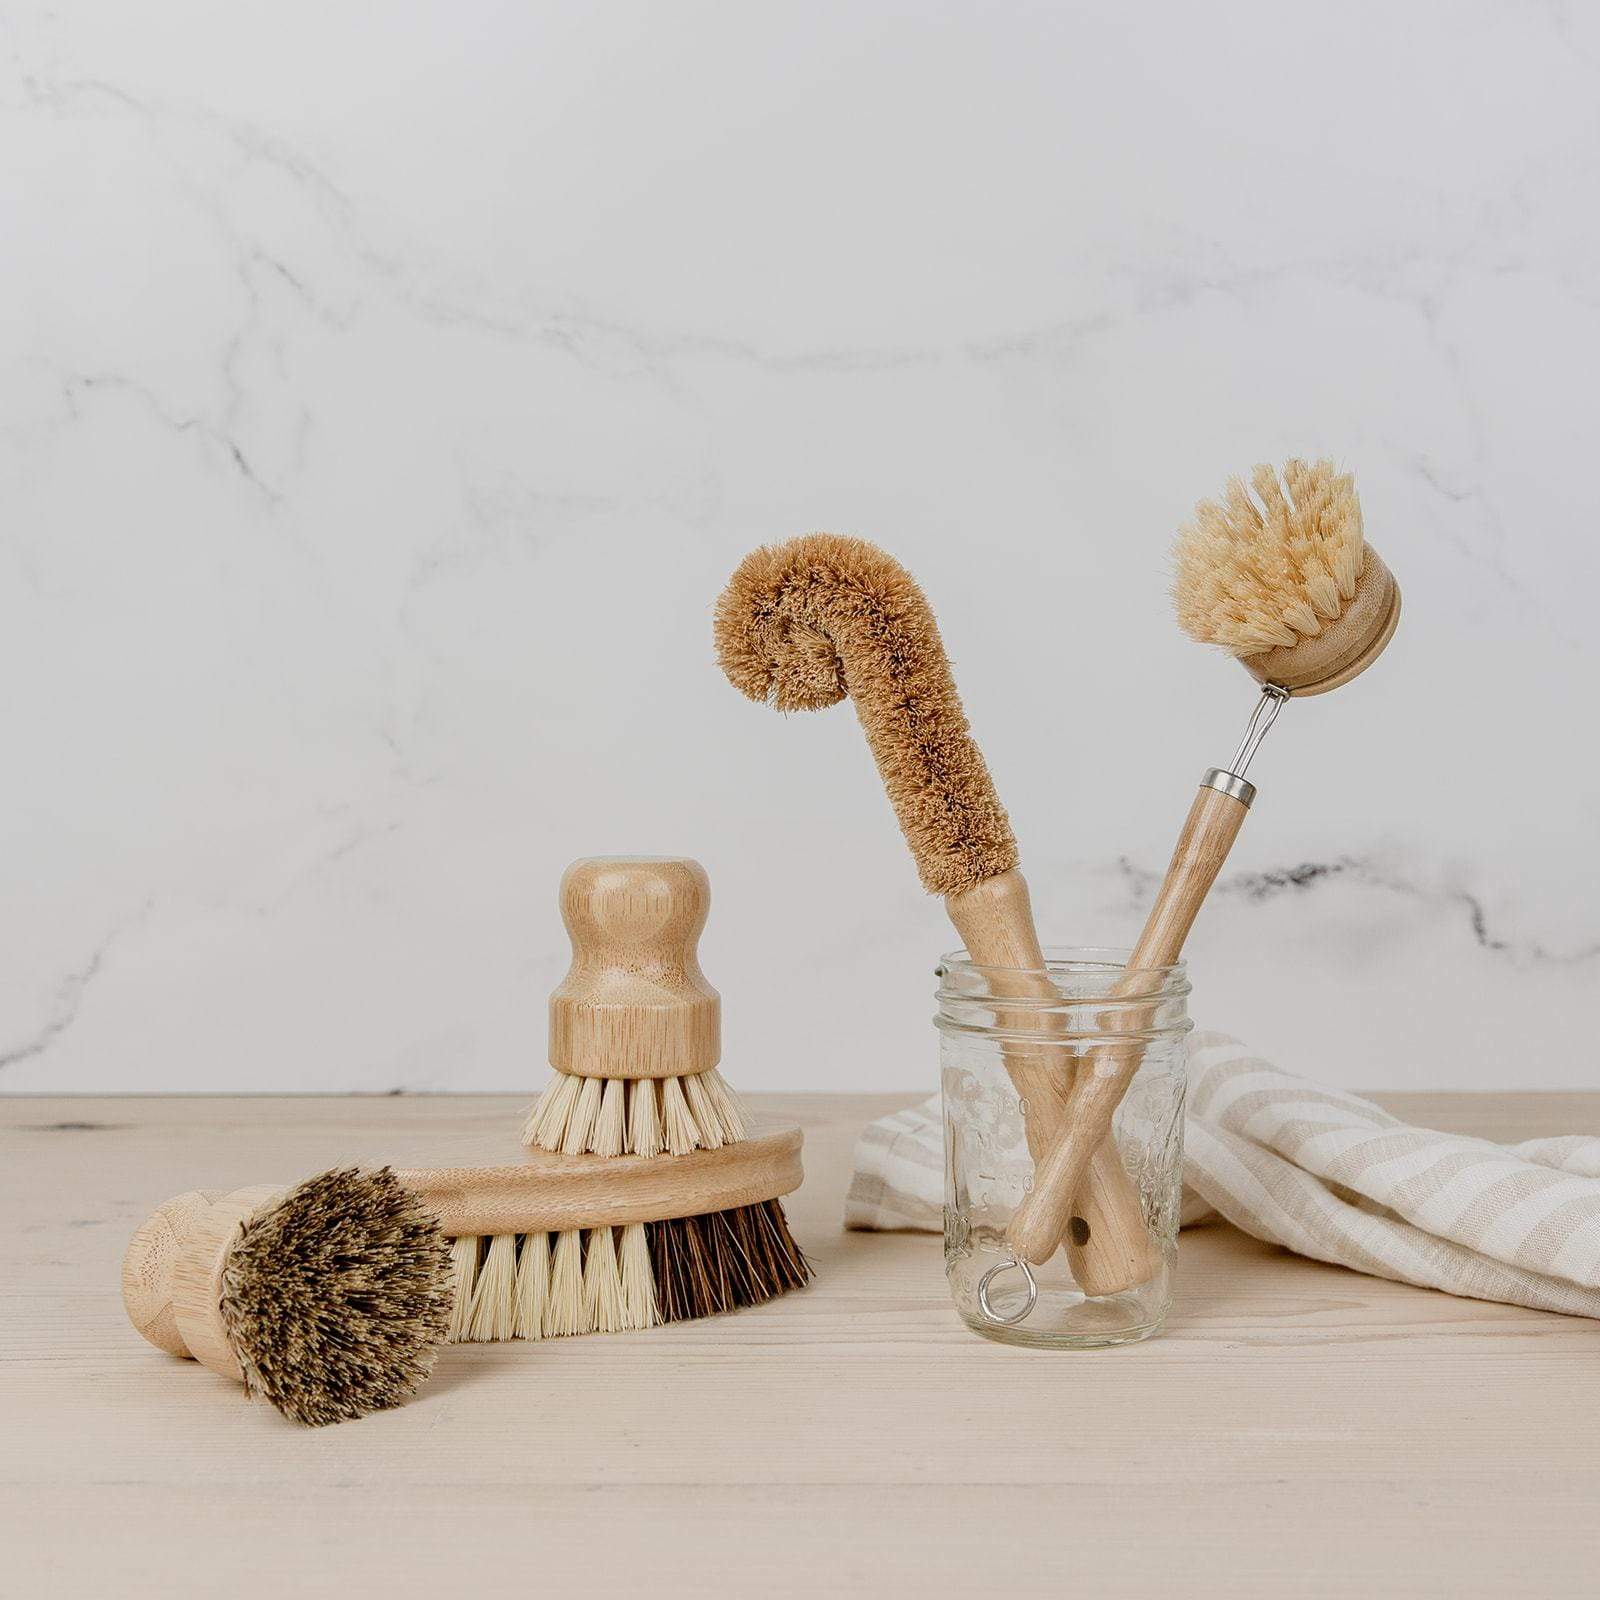 Pot Scrubber Brush - Made With 100% Natural Wood & Agave Bristle